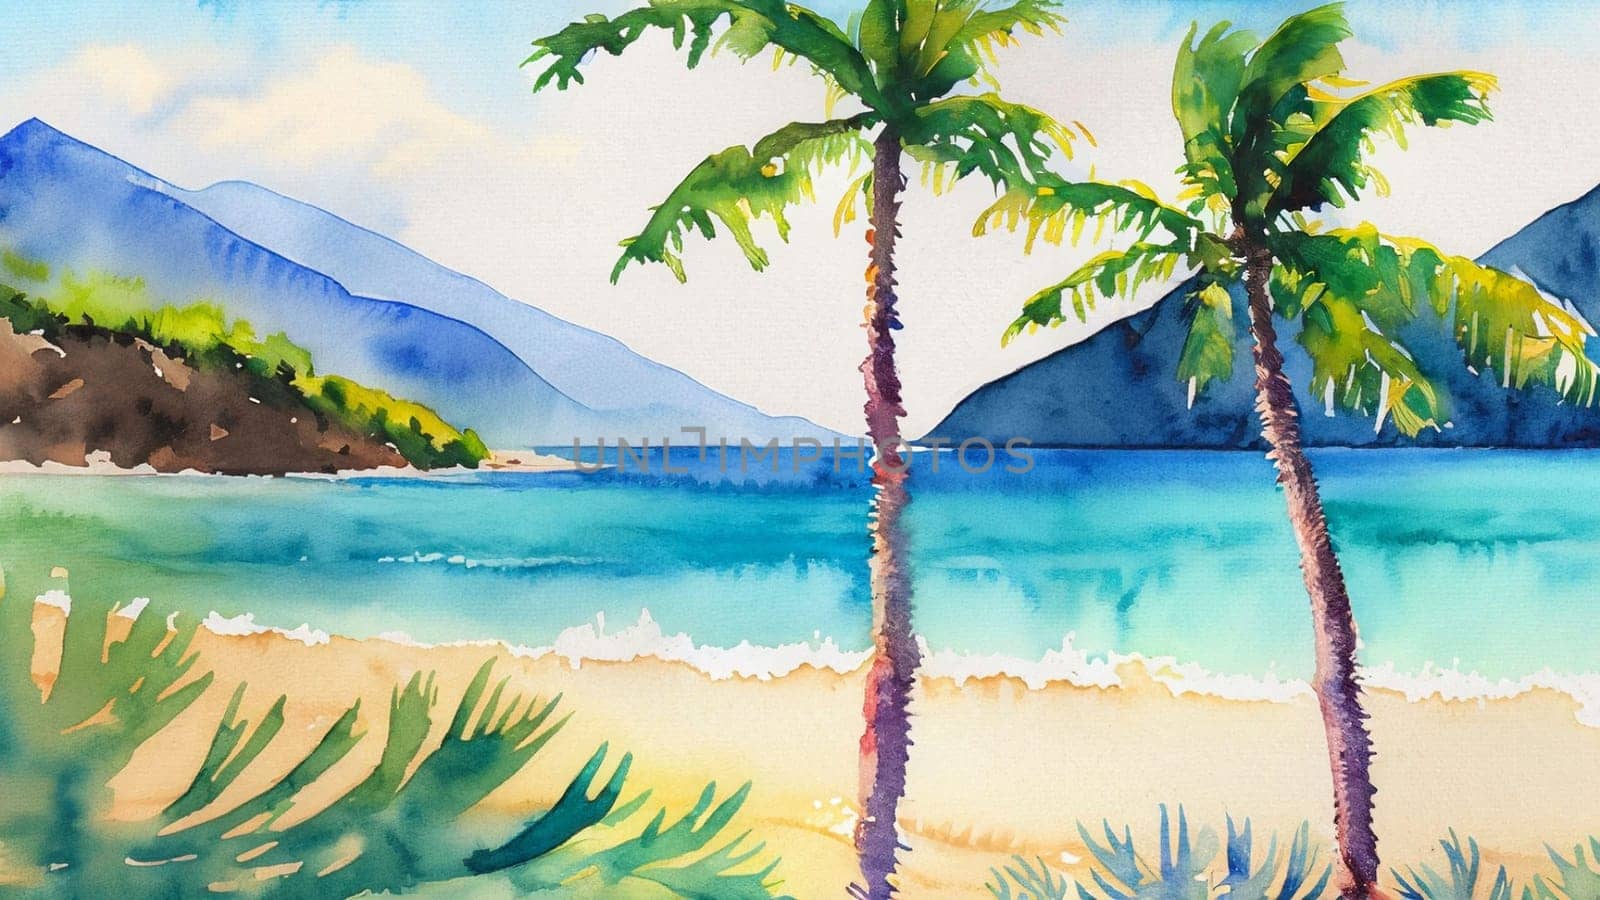 Watercolor tropical sunset landscape with ocean, sandy beach, palms, cloudy sky and mountains by Costin